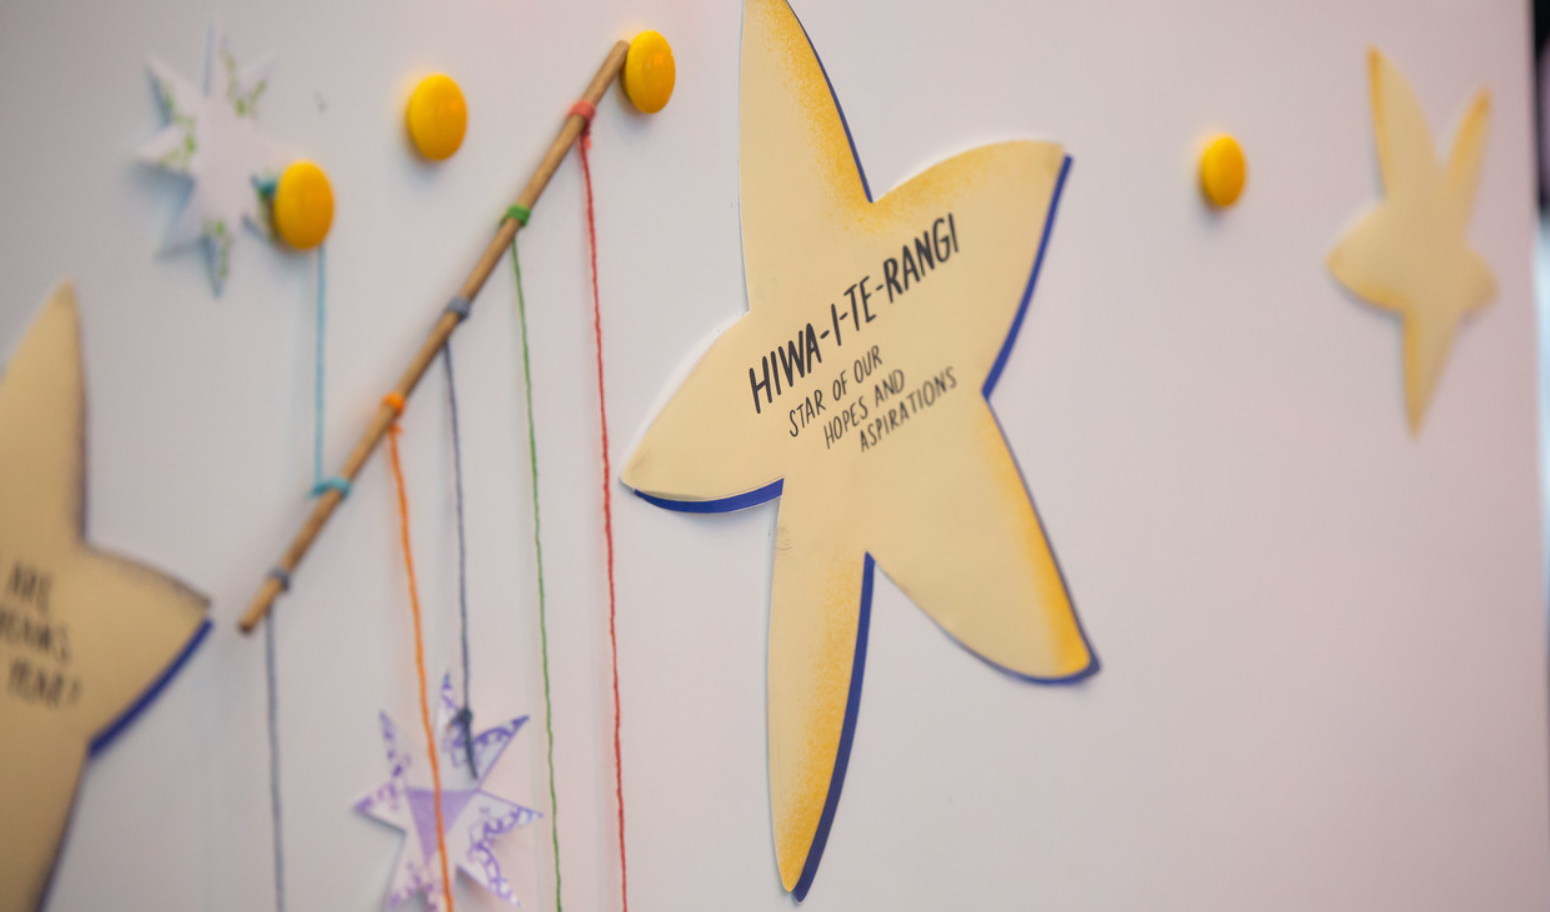 A decorative star with the words "Hiwa-I-Te-Rangi: Star of Our Hopes and Aspirations" written on it